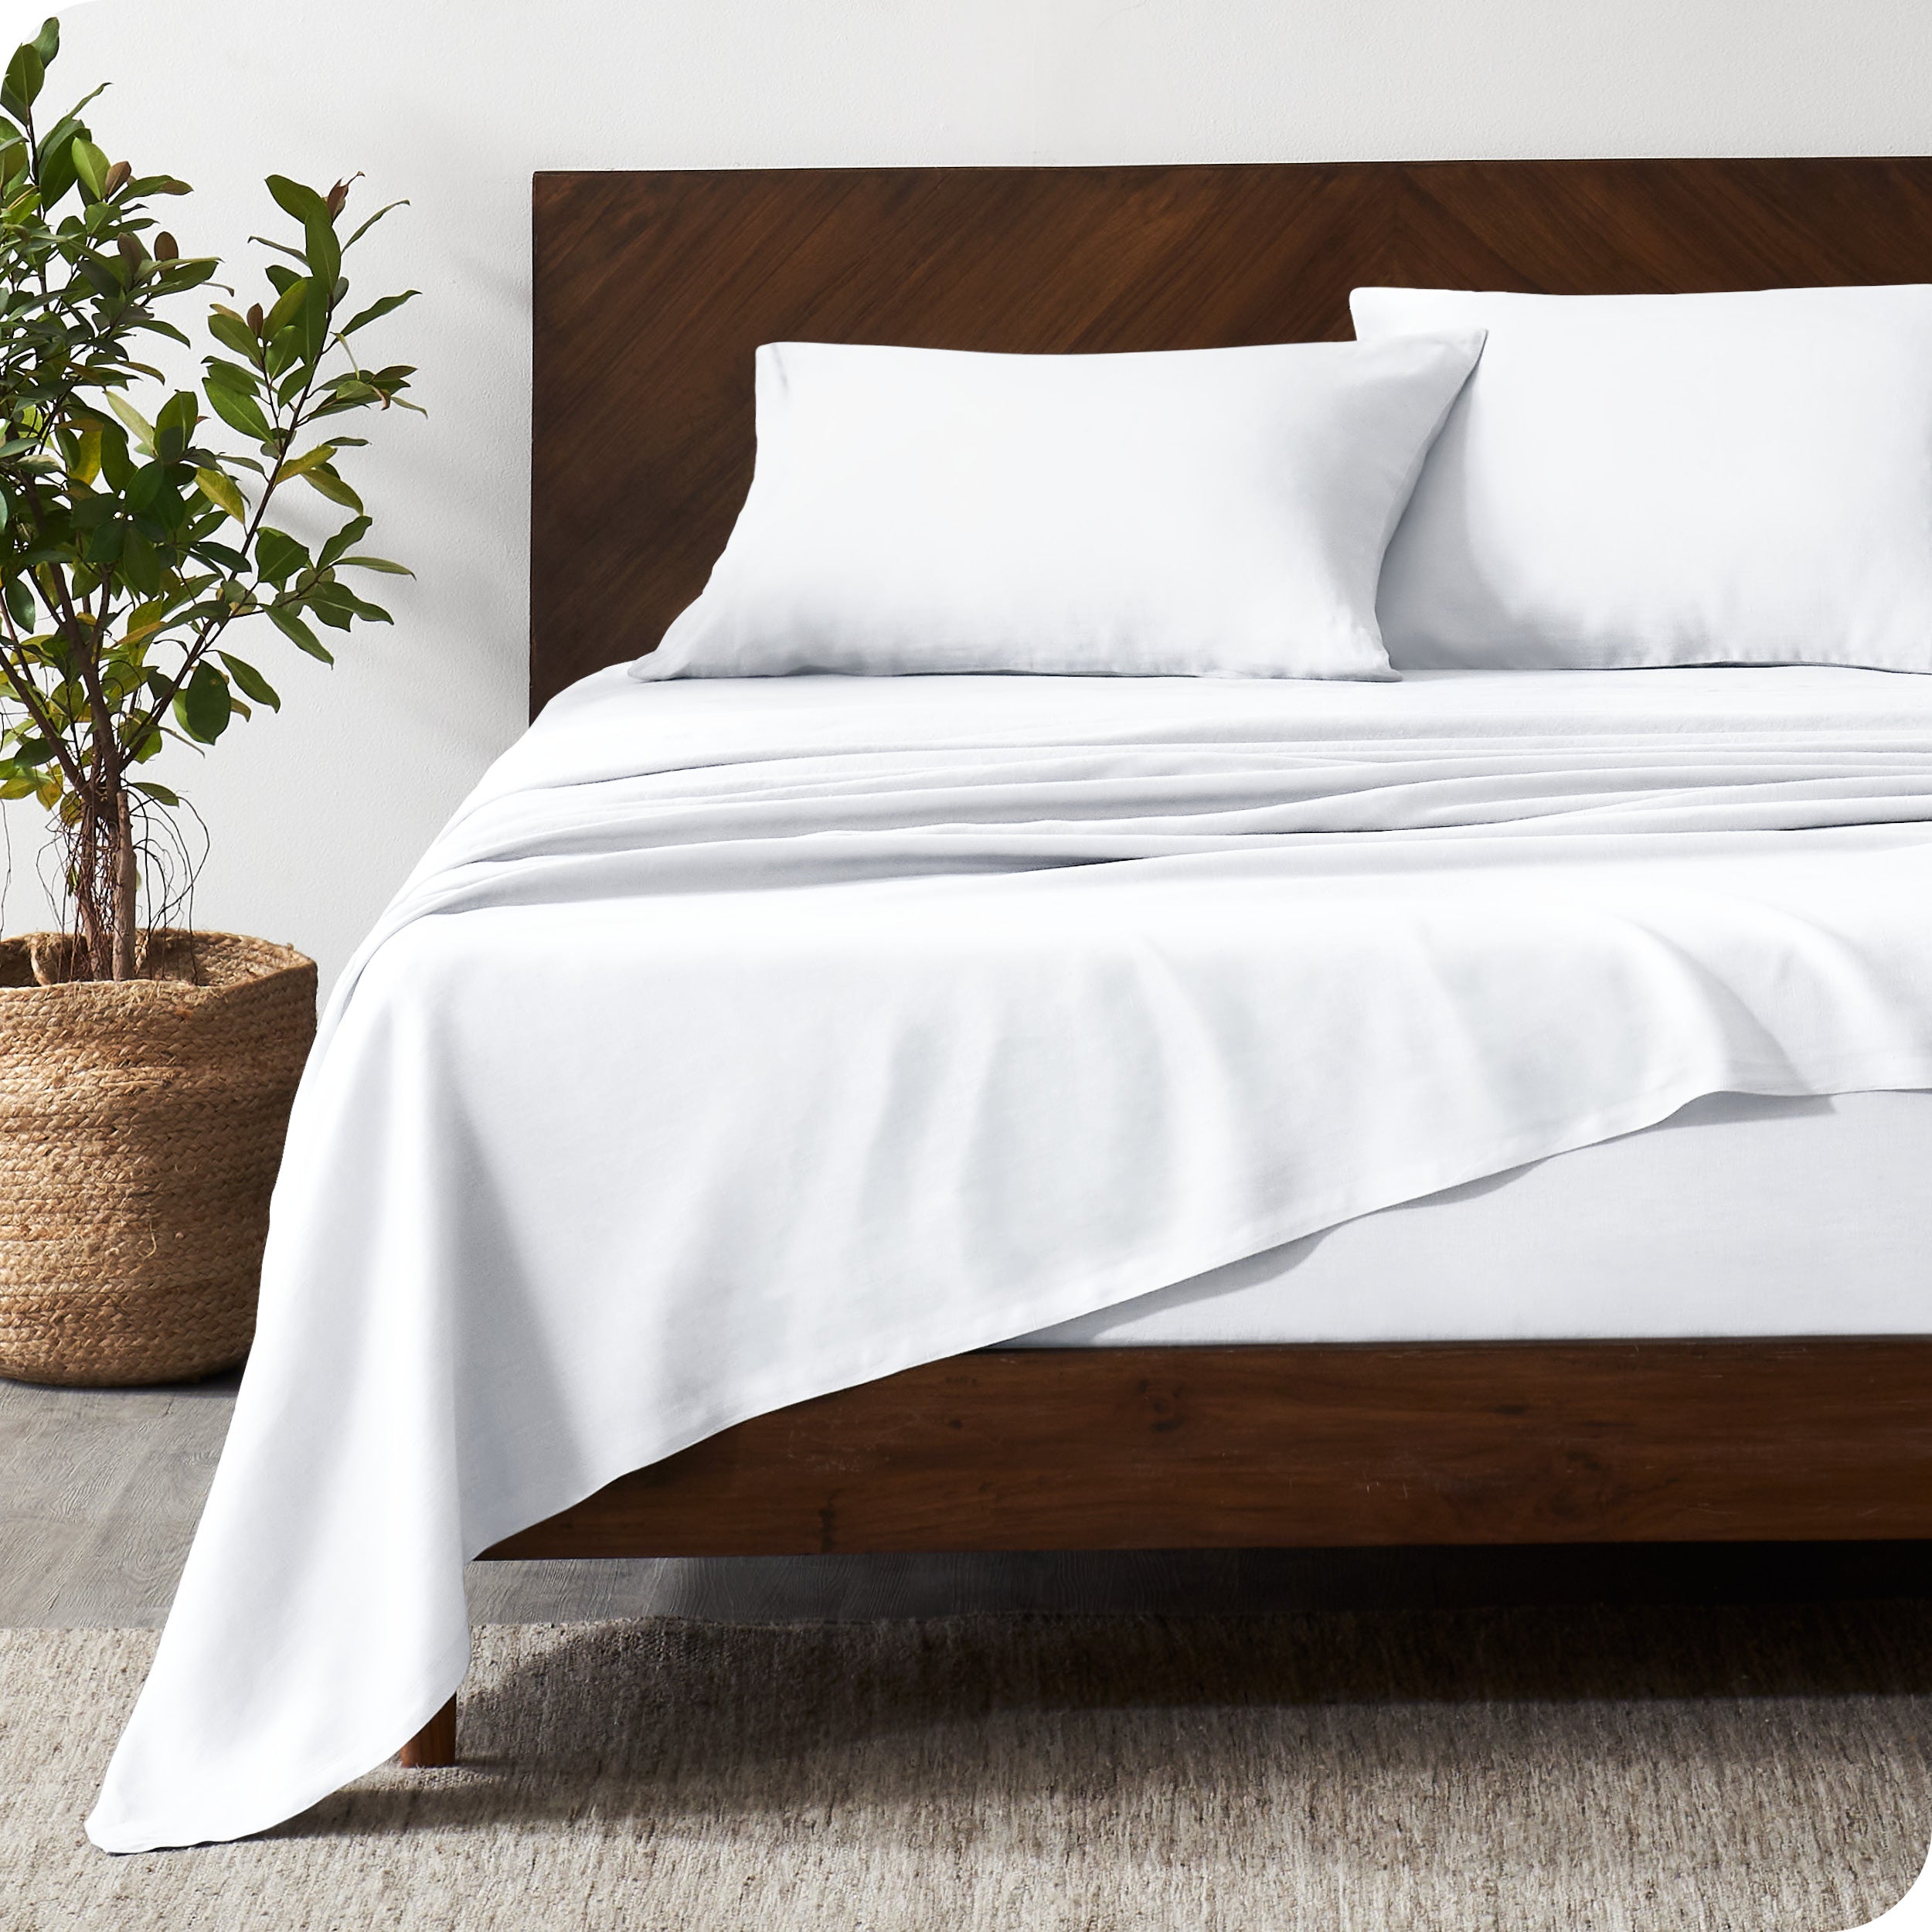 Dark wooden bed frame with white linen sheets on the mattress